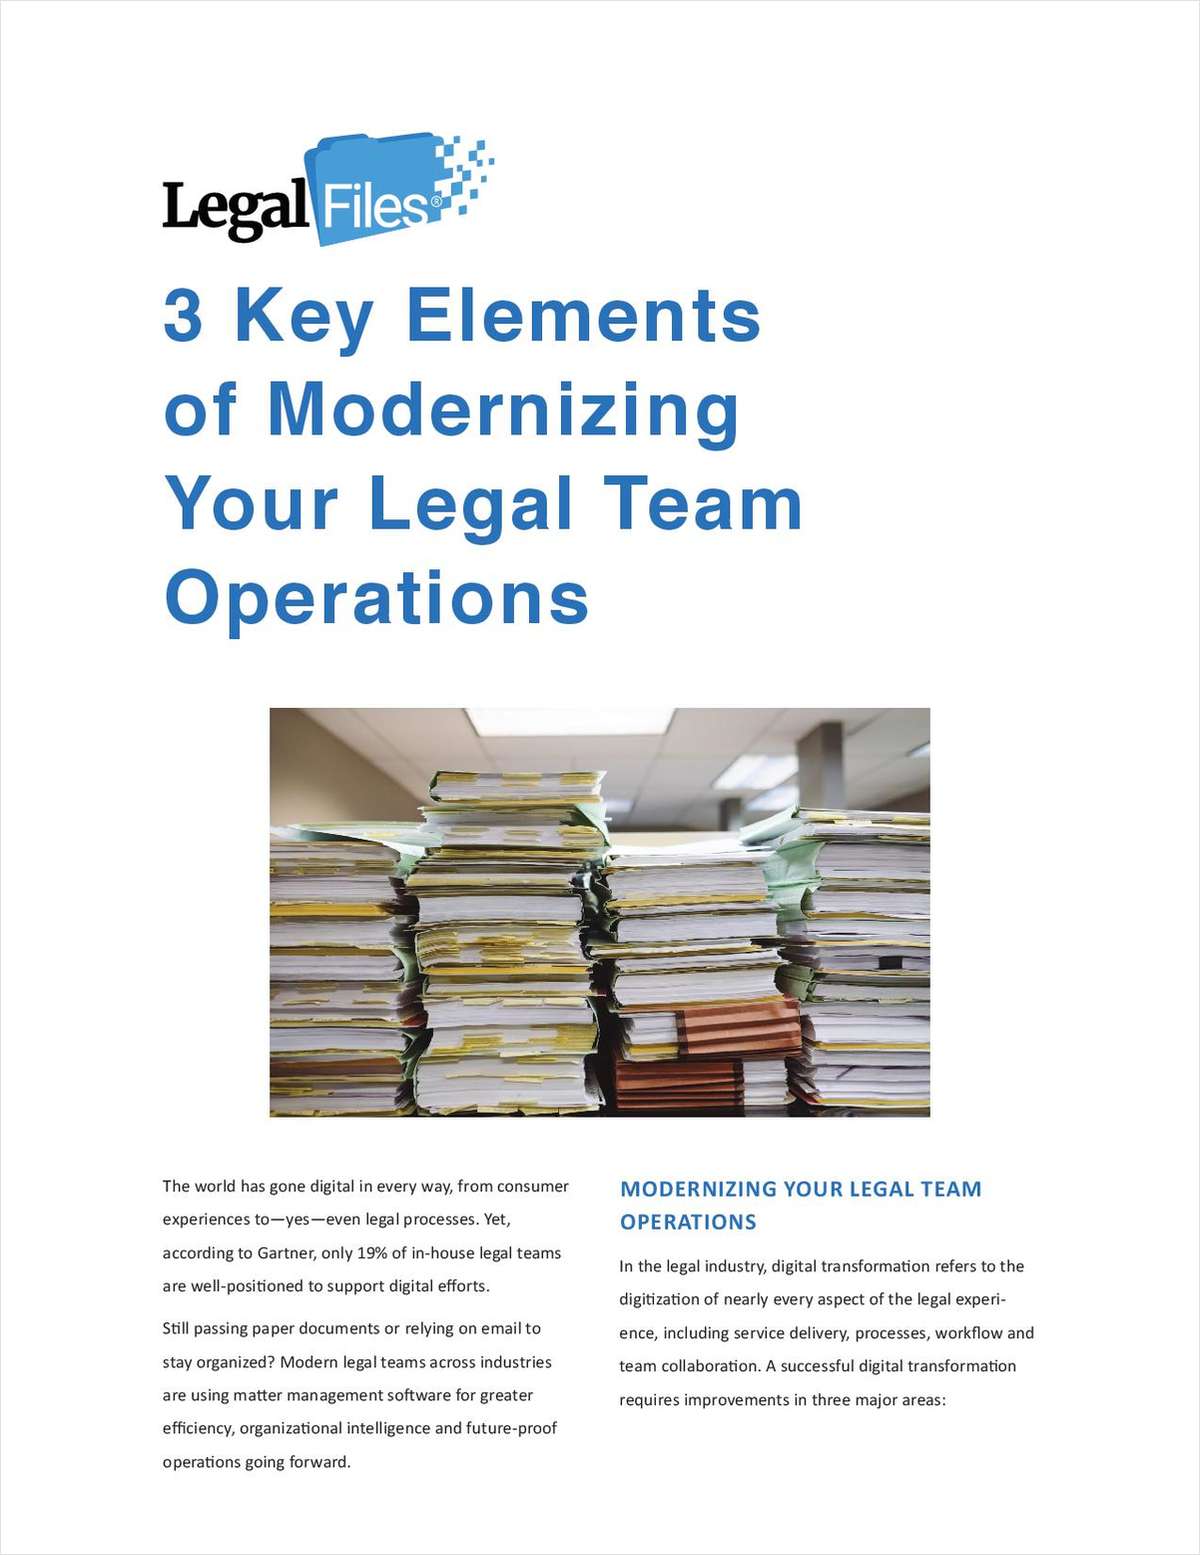 3 Key Elements of Modernizing Your Legal Team Operations